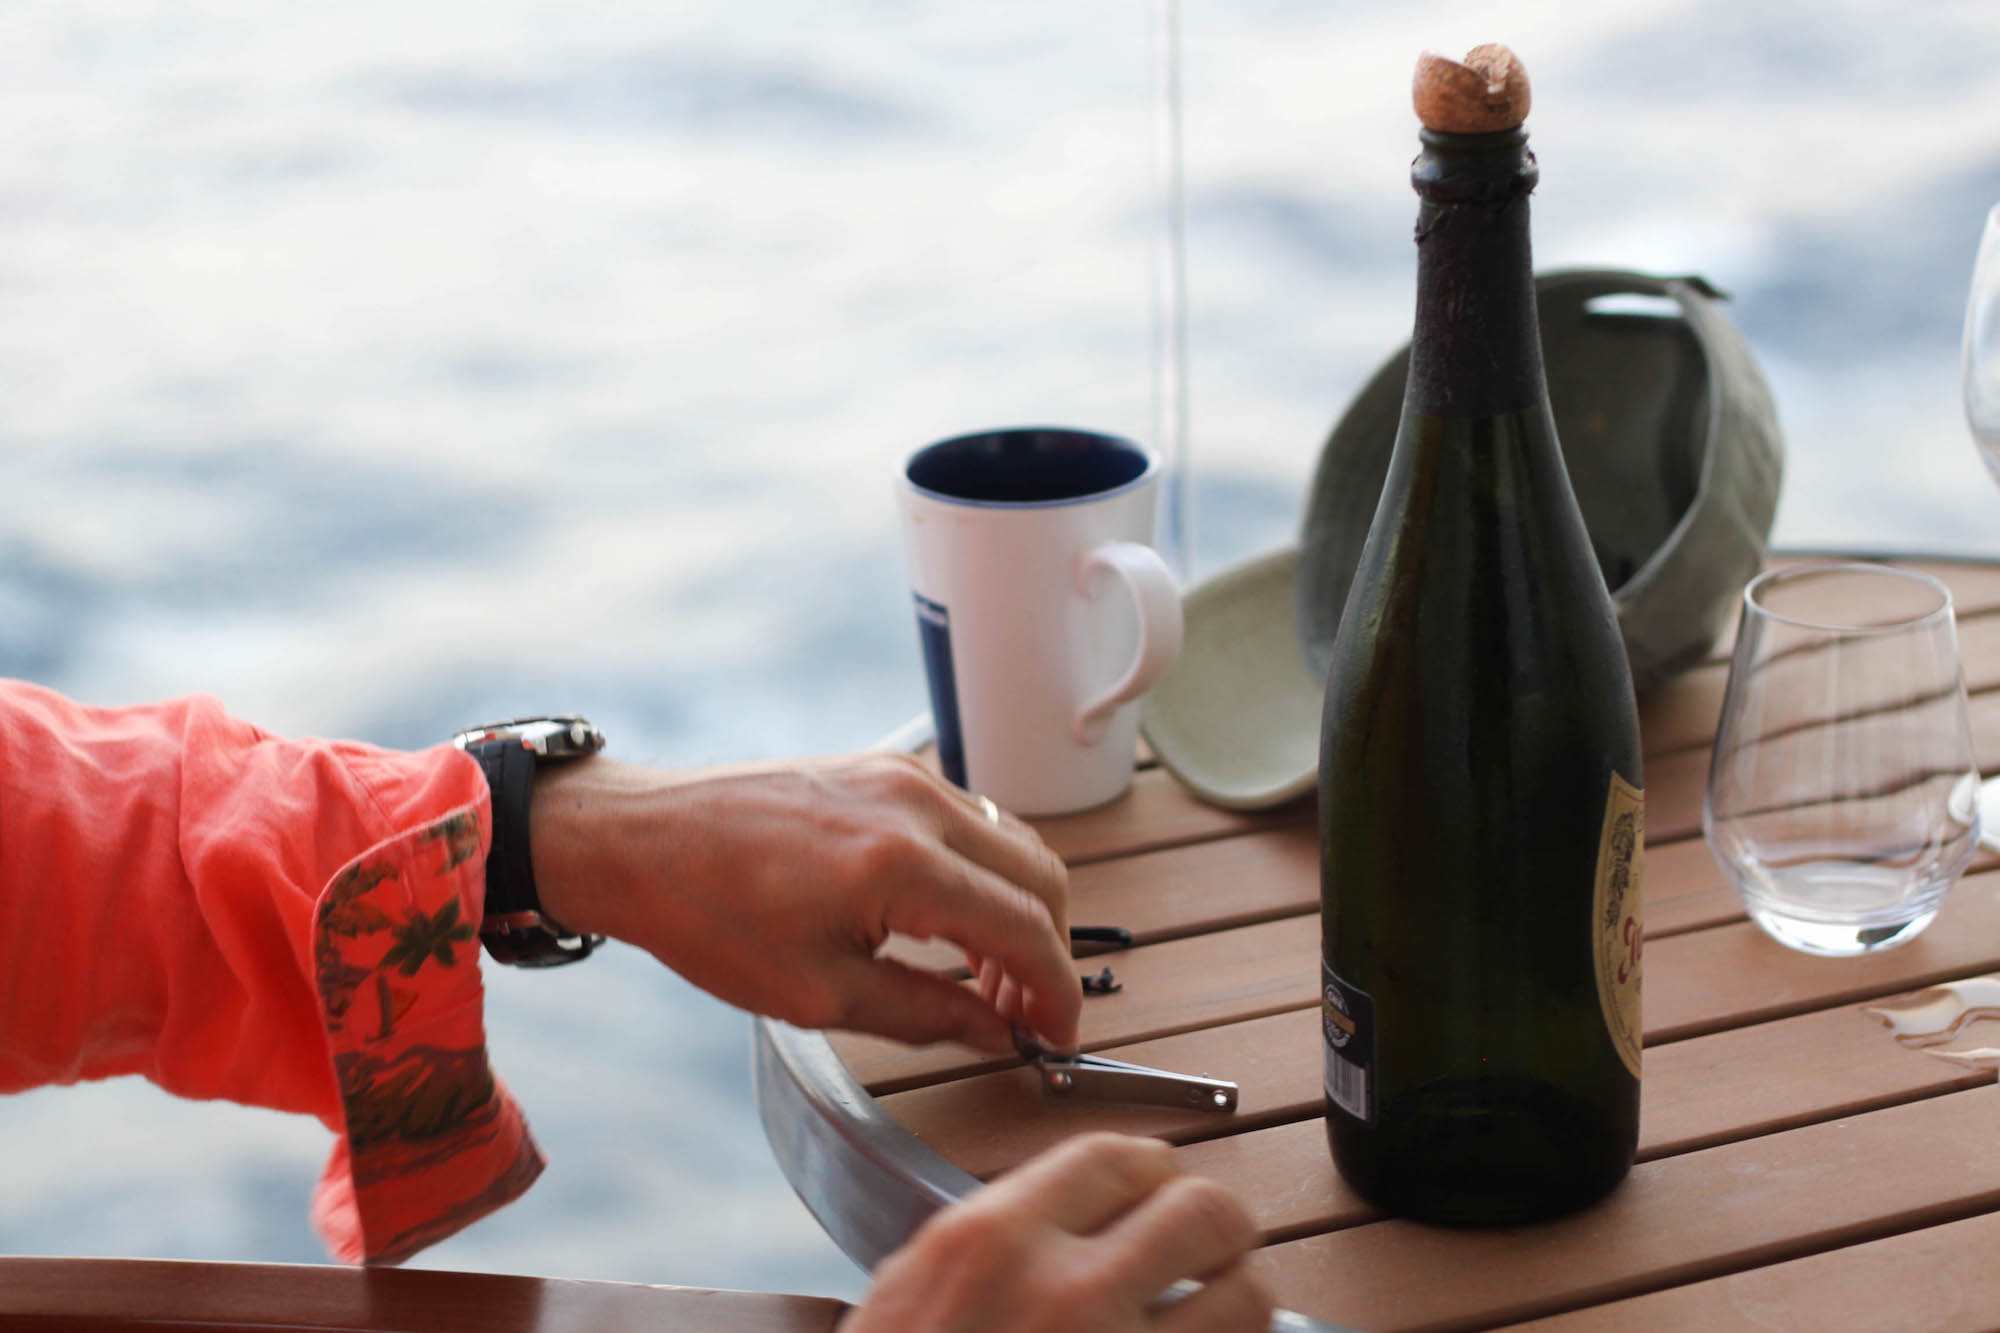 Champagne on the boat (Eat Me. Drink Me.)